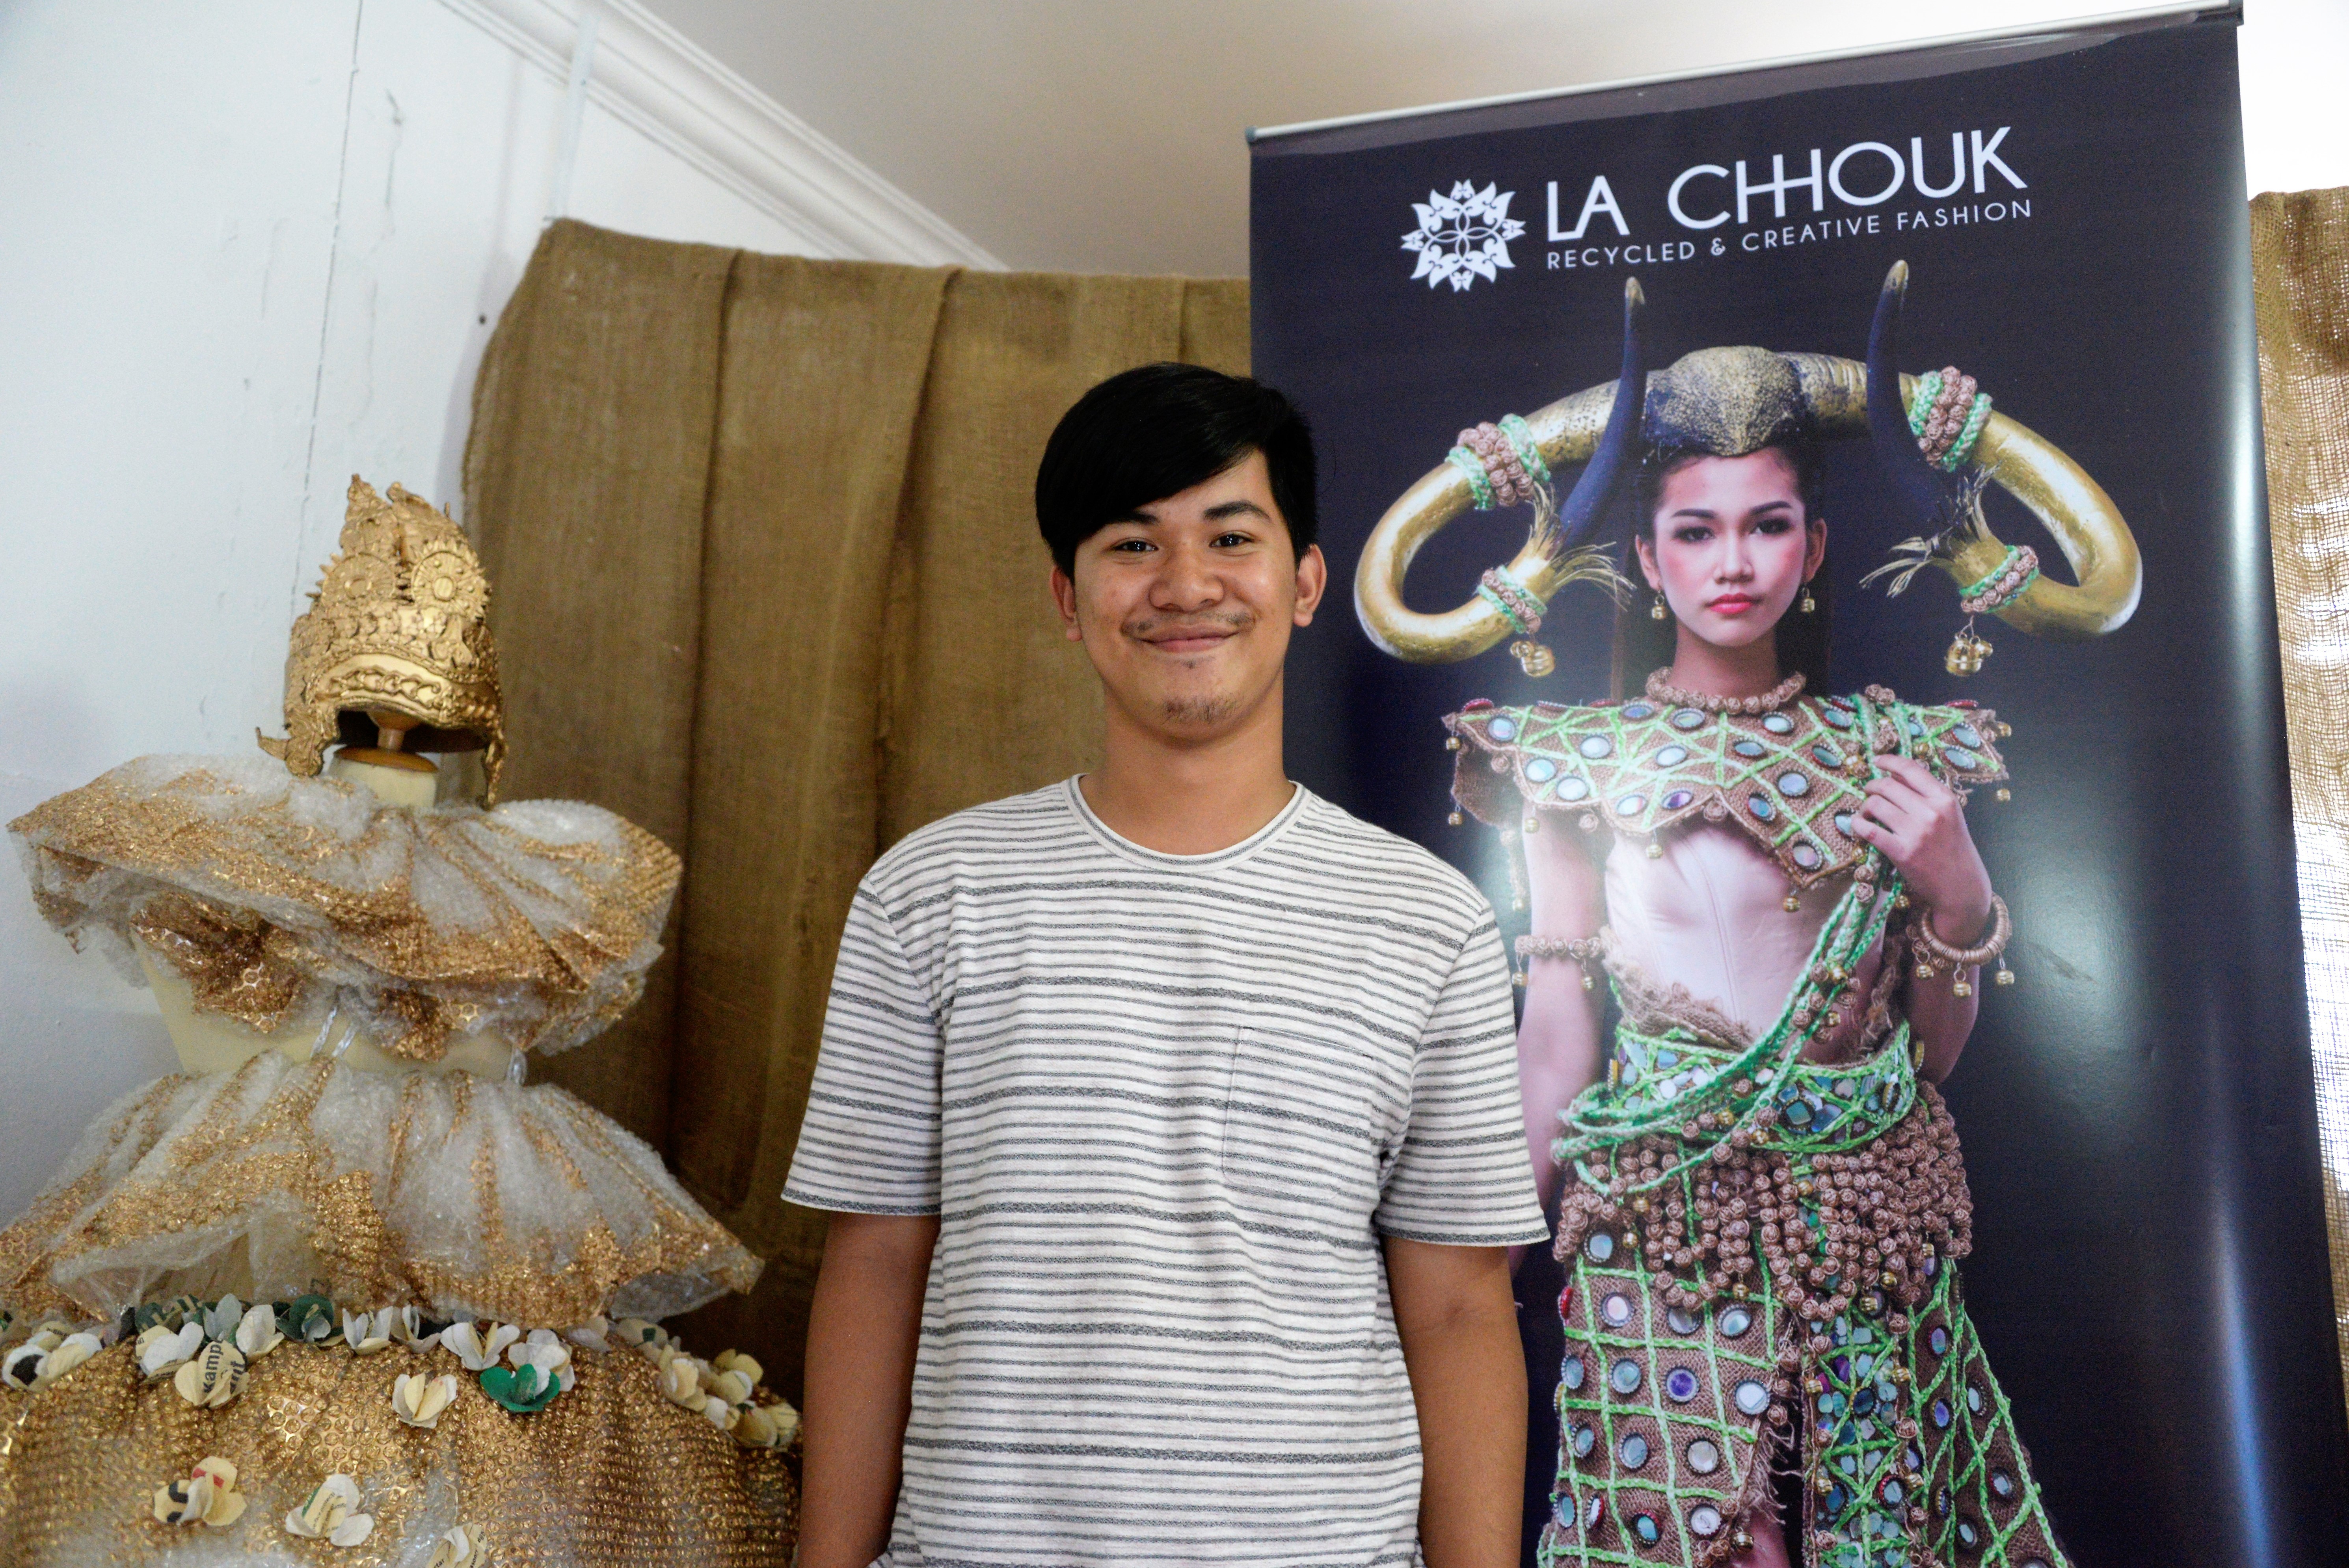 Seng Super, co-founder of La Chhouk, a Cambodian creative fashion initiative that makes clothing out of trash and other recyclable materials. Photo: Didem Tali